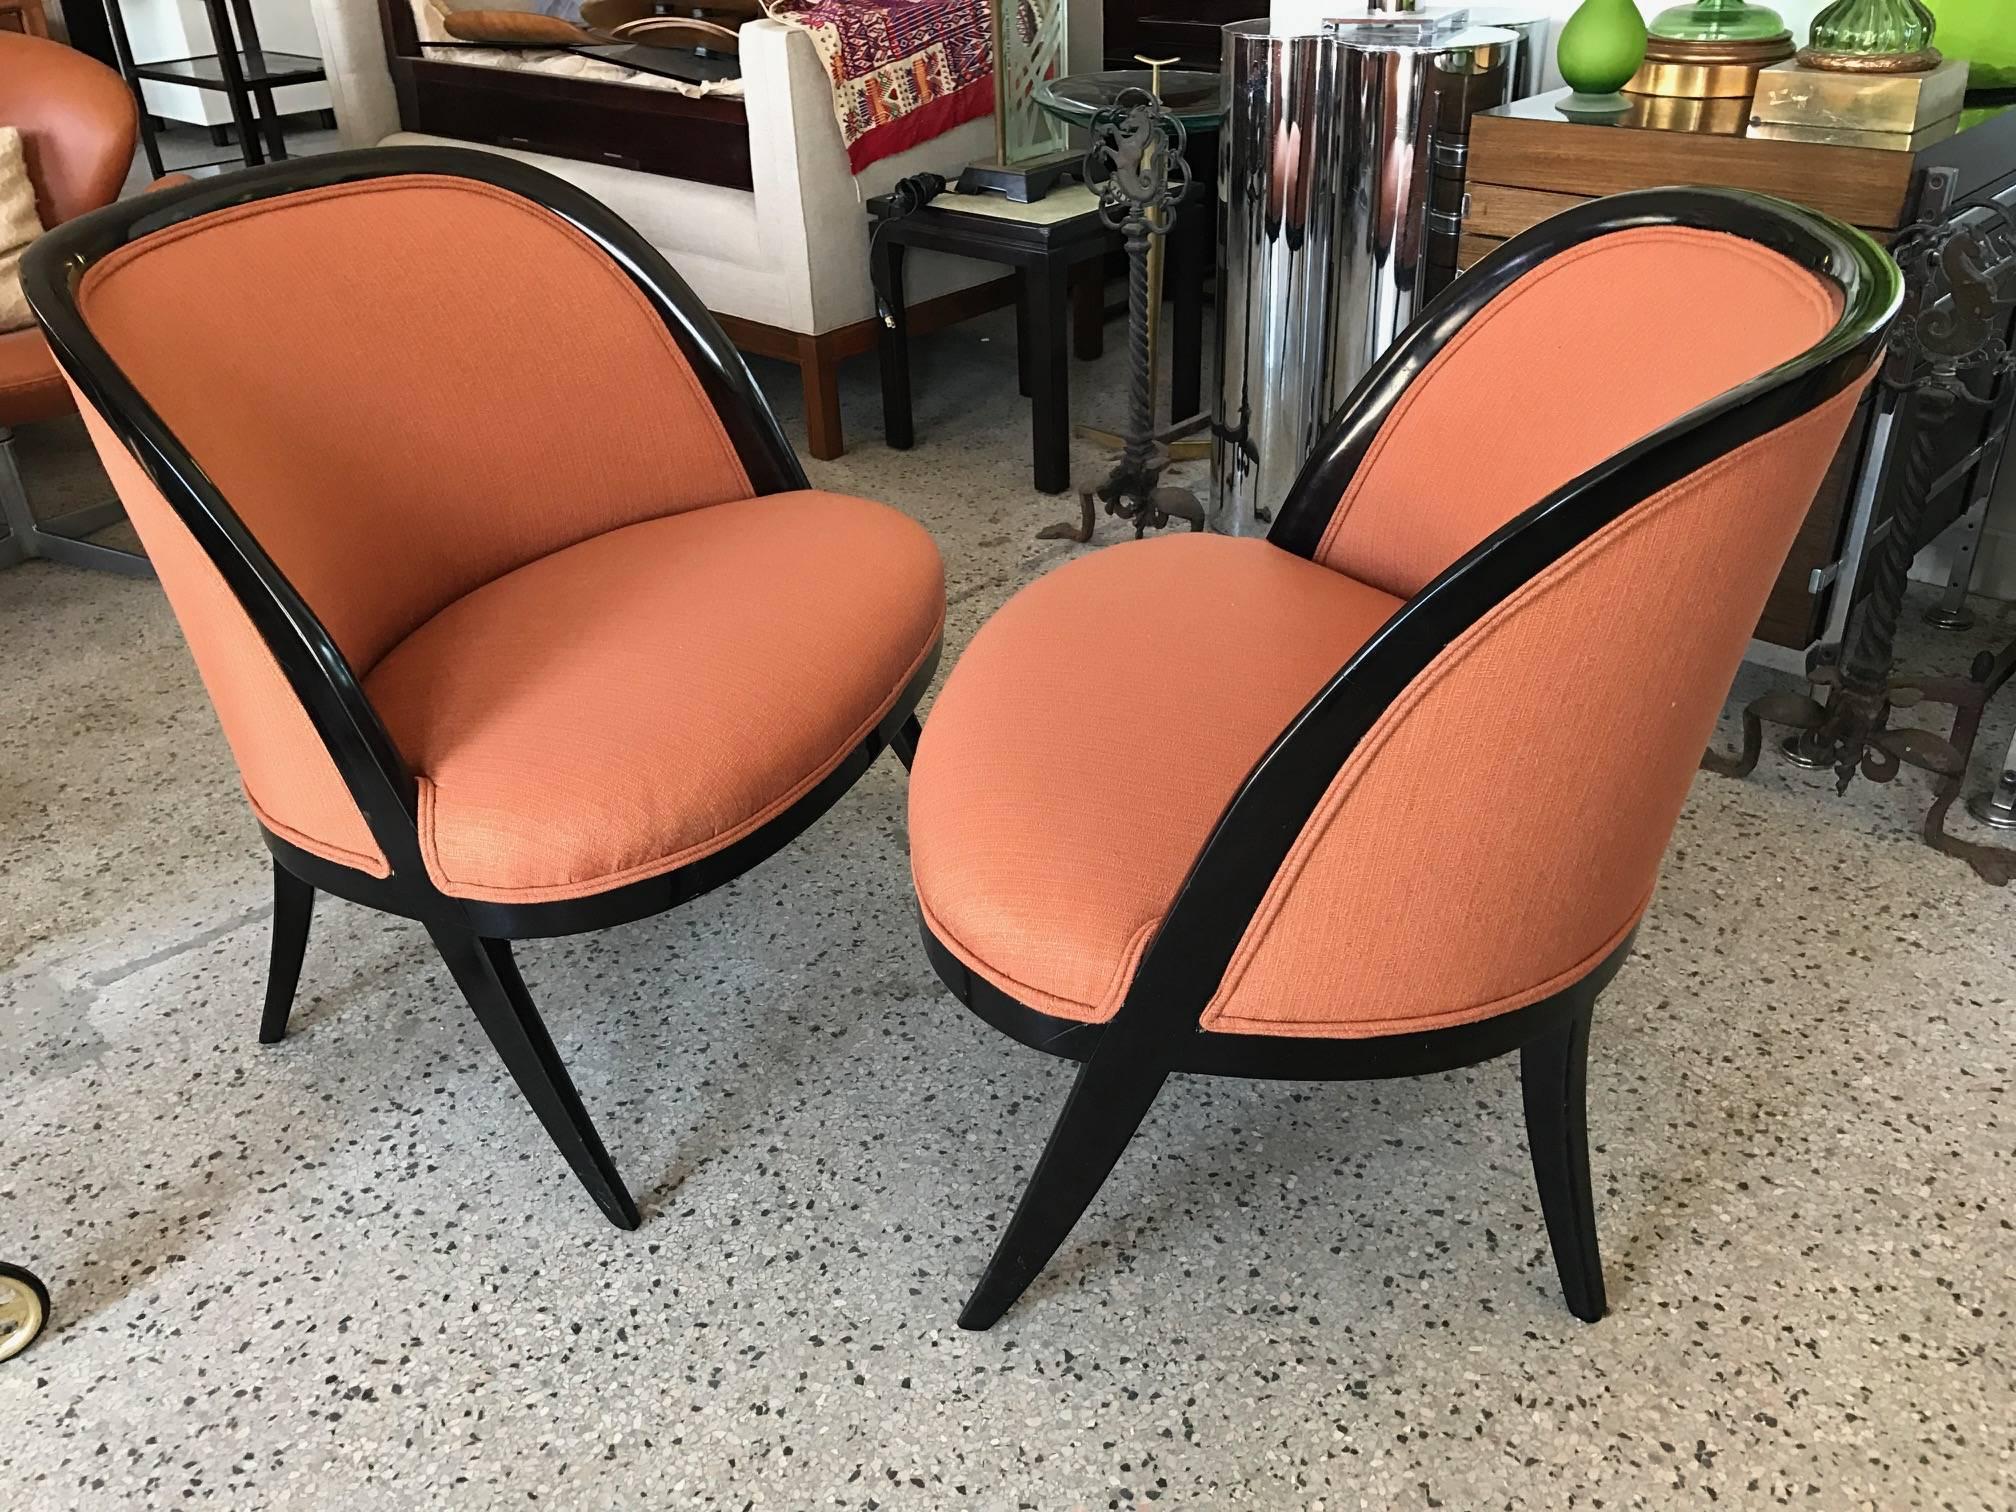 A pair of elegant slipper chairs in the style of Harvey Probber, circa 1950s.